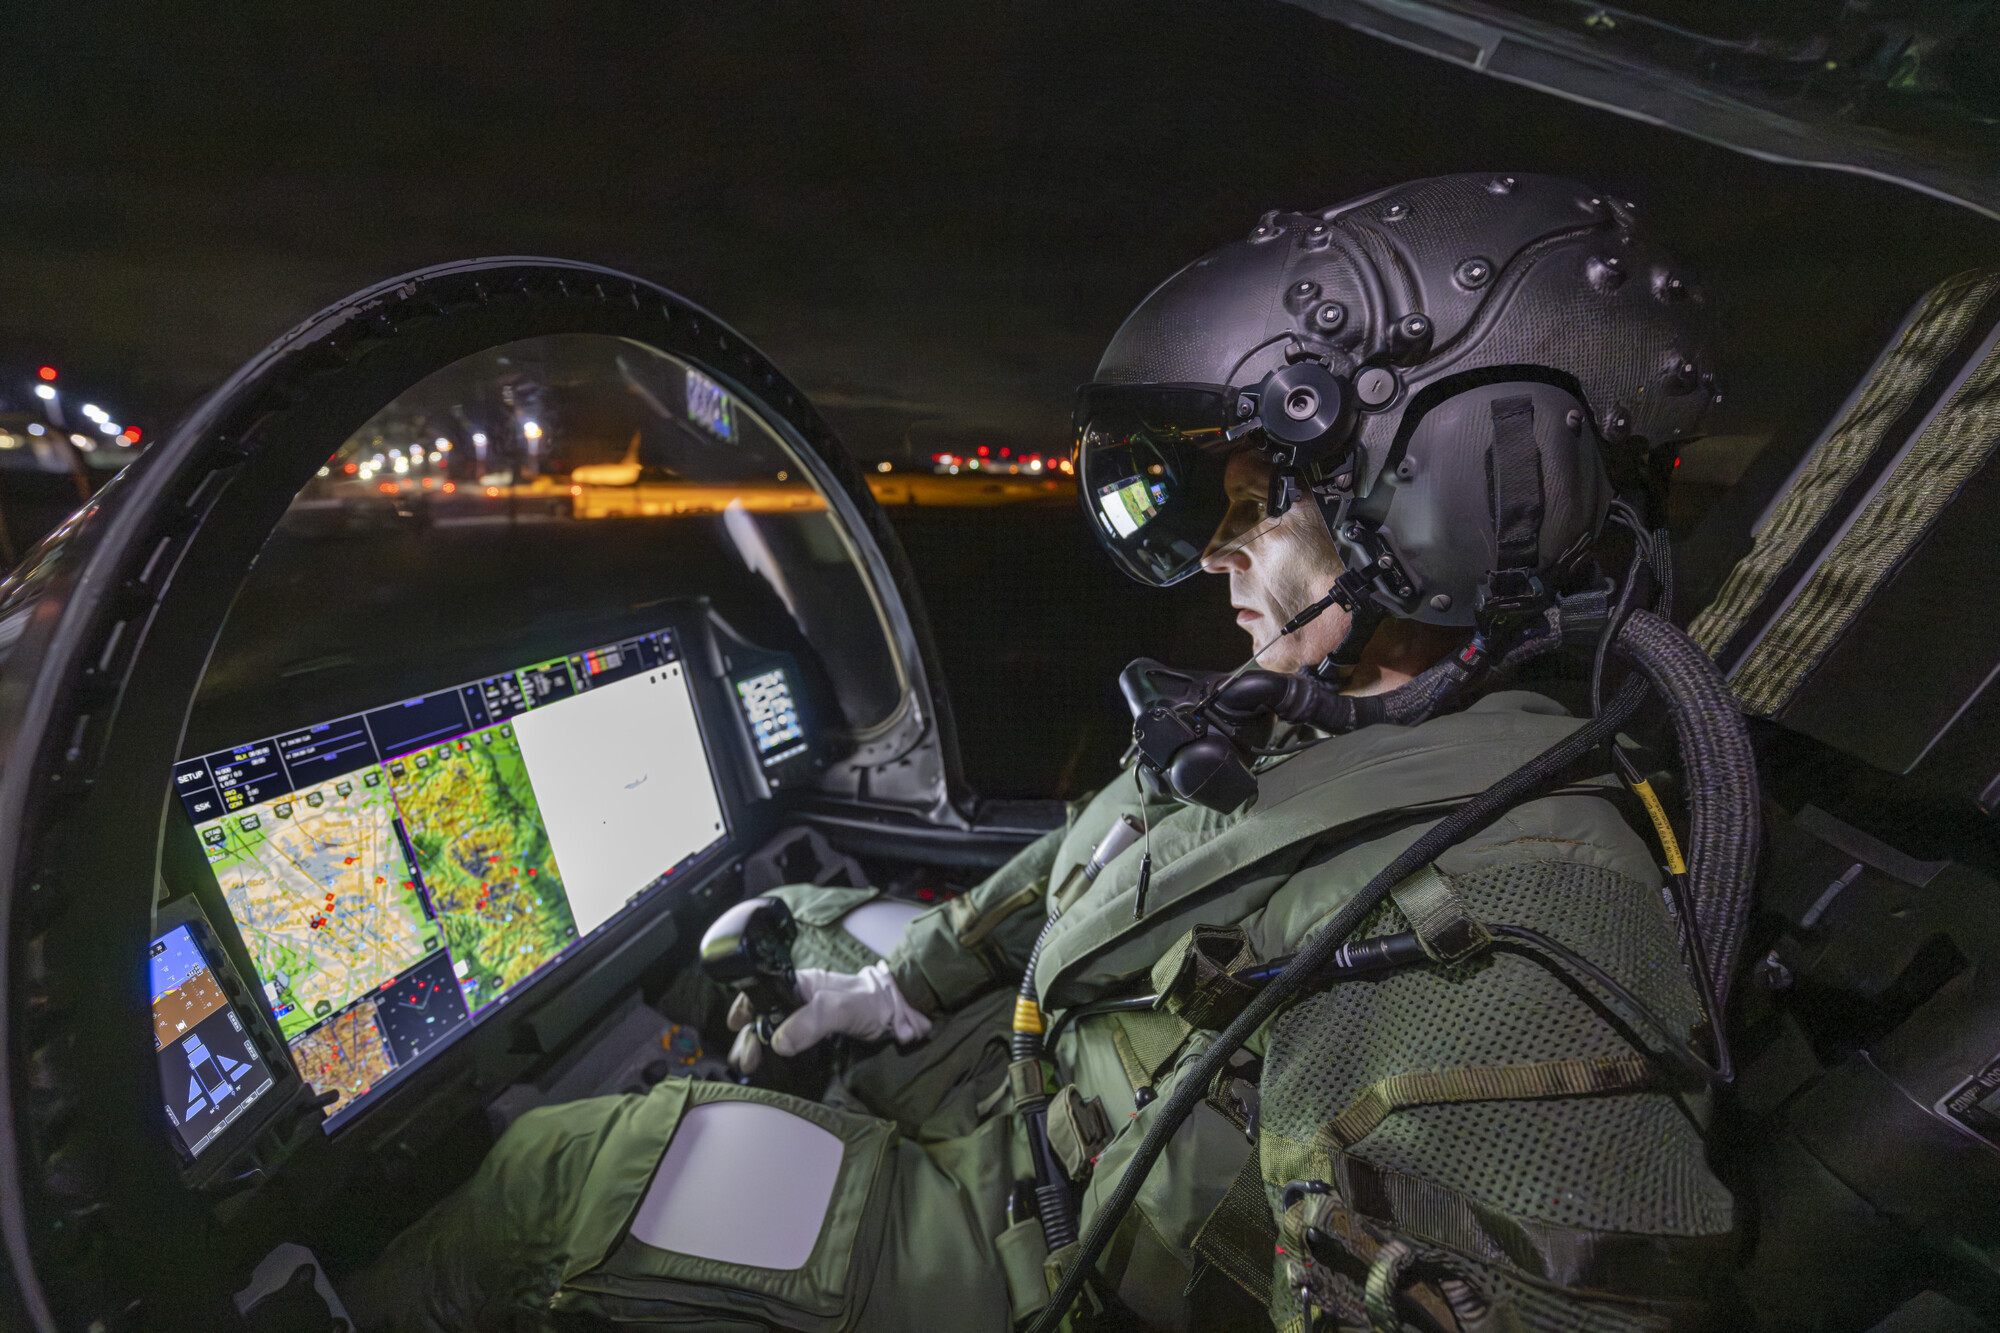 Image shows pilot wearing helmet in an aircraft